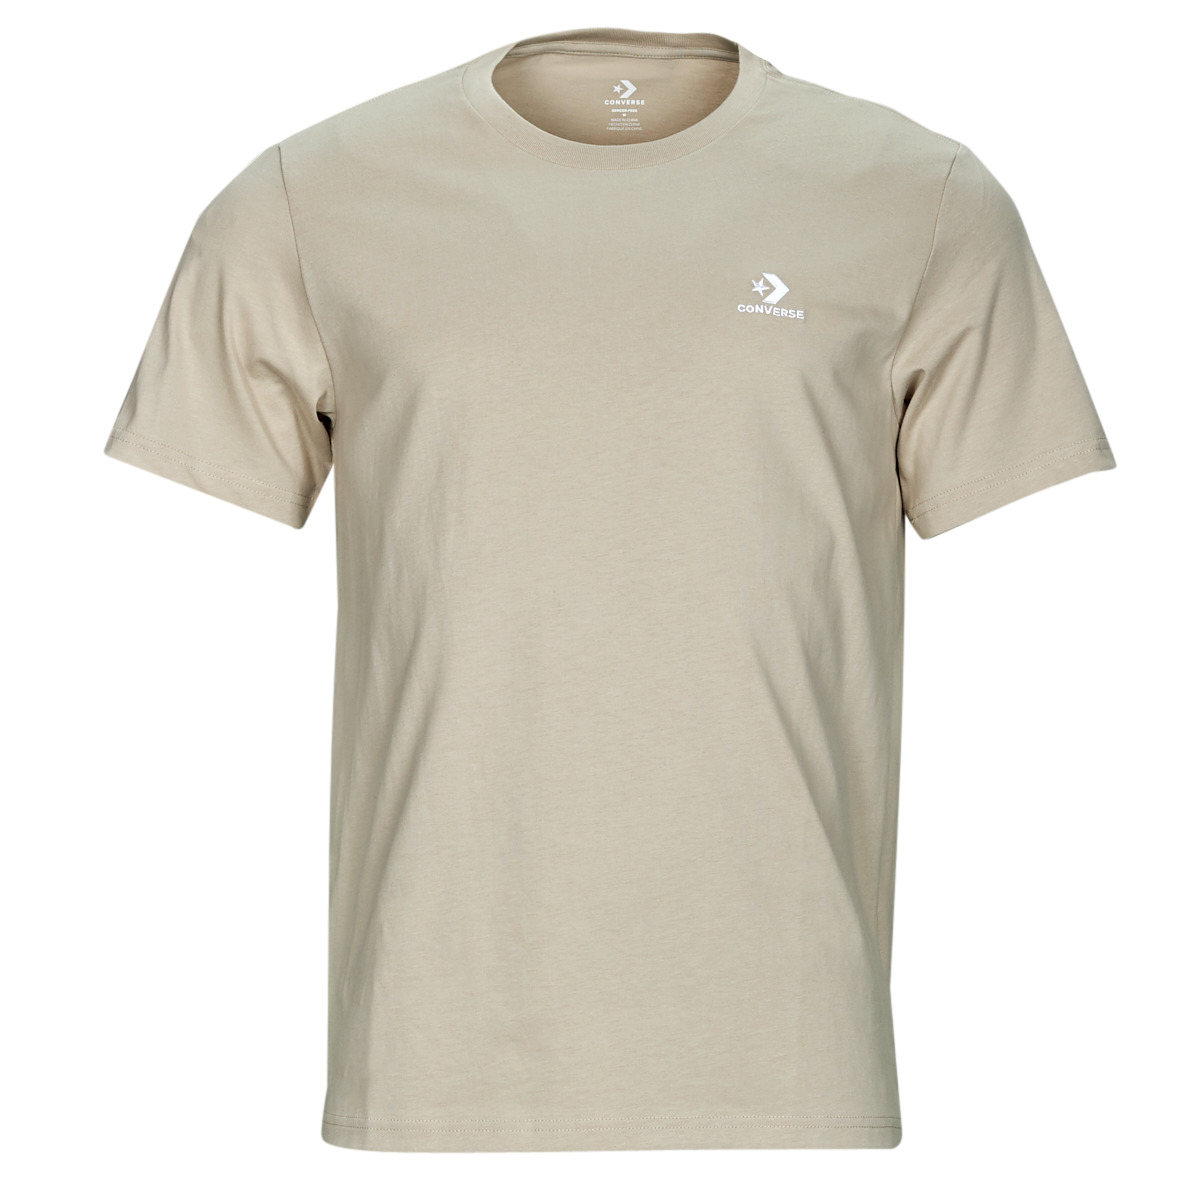 Converse GO-TO EMBROIDERED STAR CHEVRON Spartoo delivery | t-shirts TEE - € Clothing Beige 22,40 short-sleeved Europe ! - Men Fast